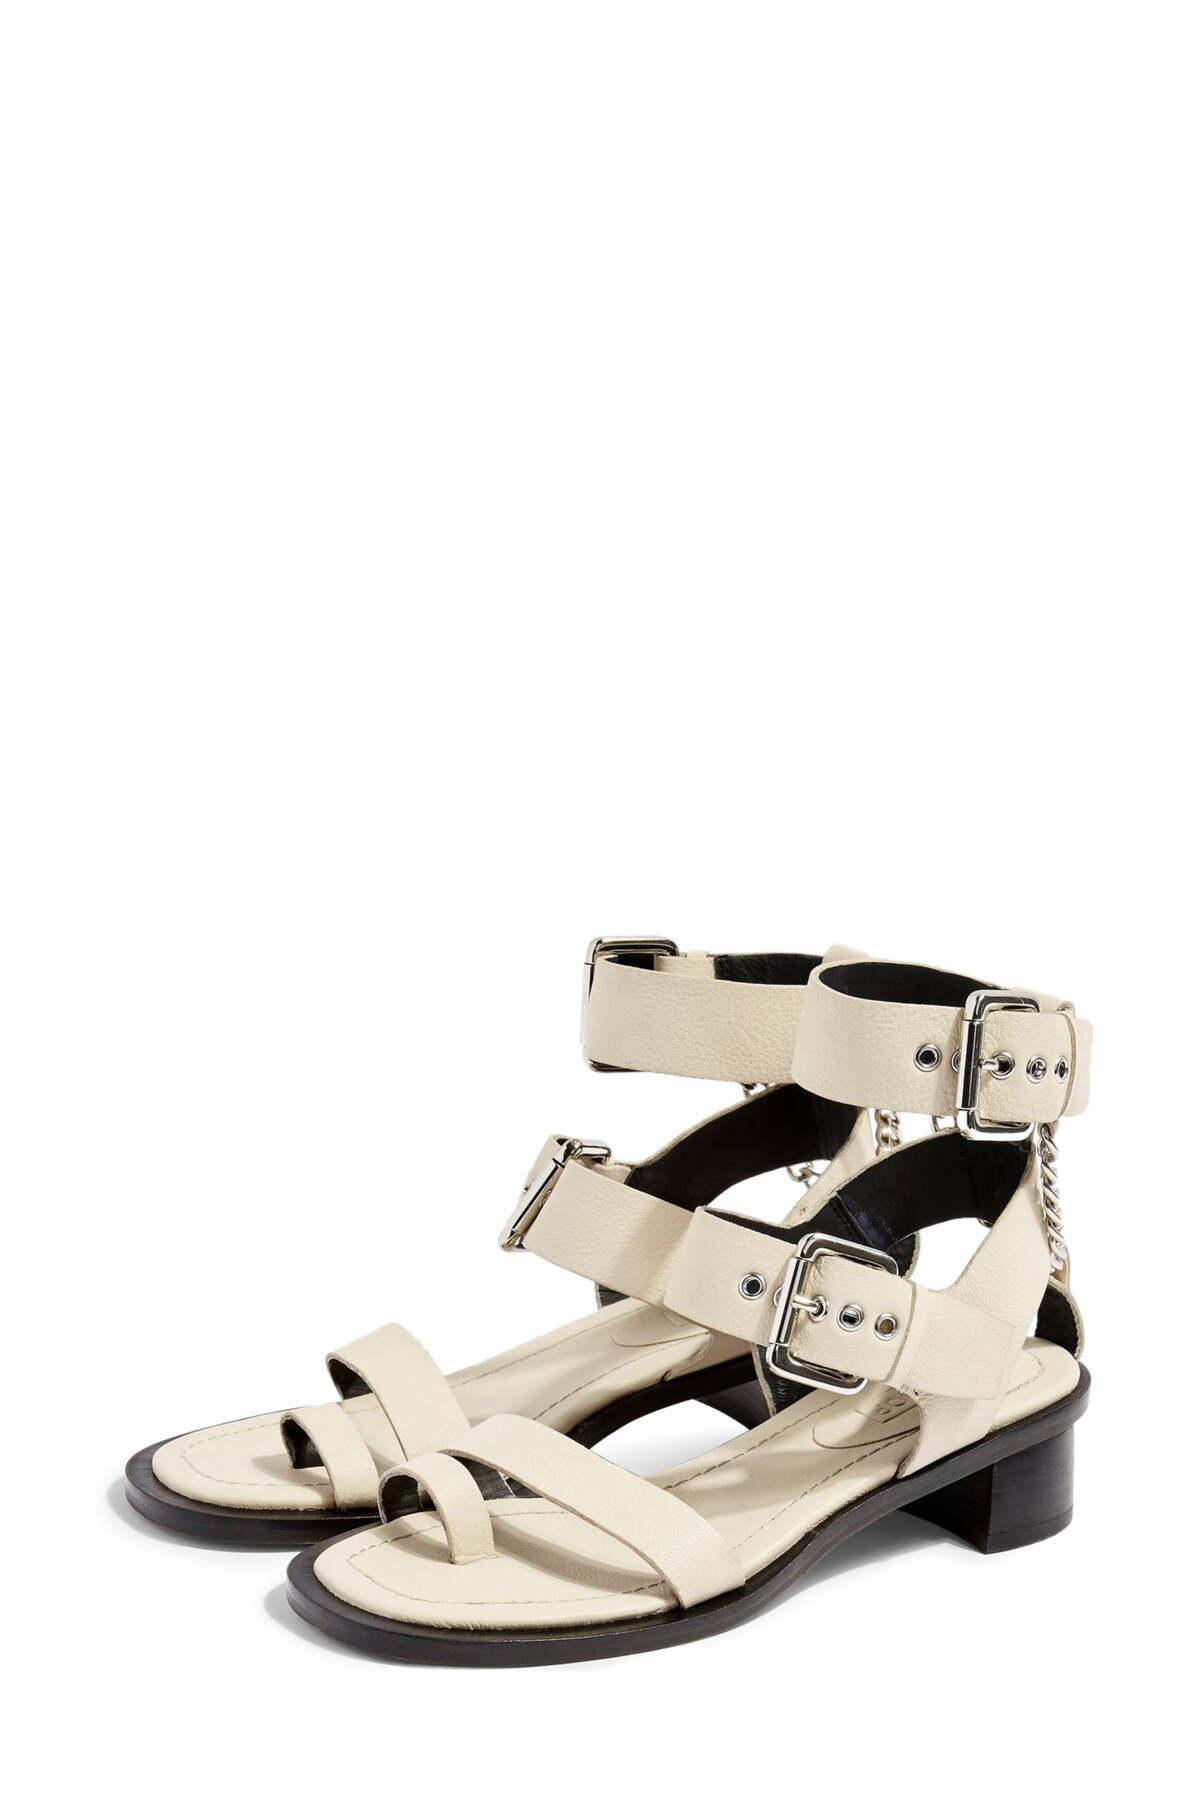 TOPSHOP Leather Forever Chain Sandal - Lyst